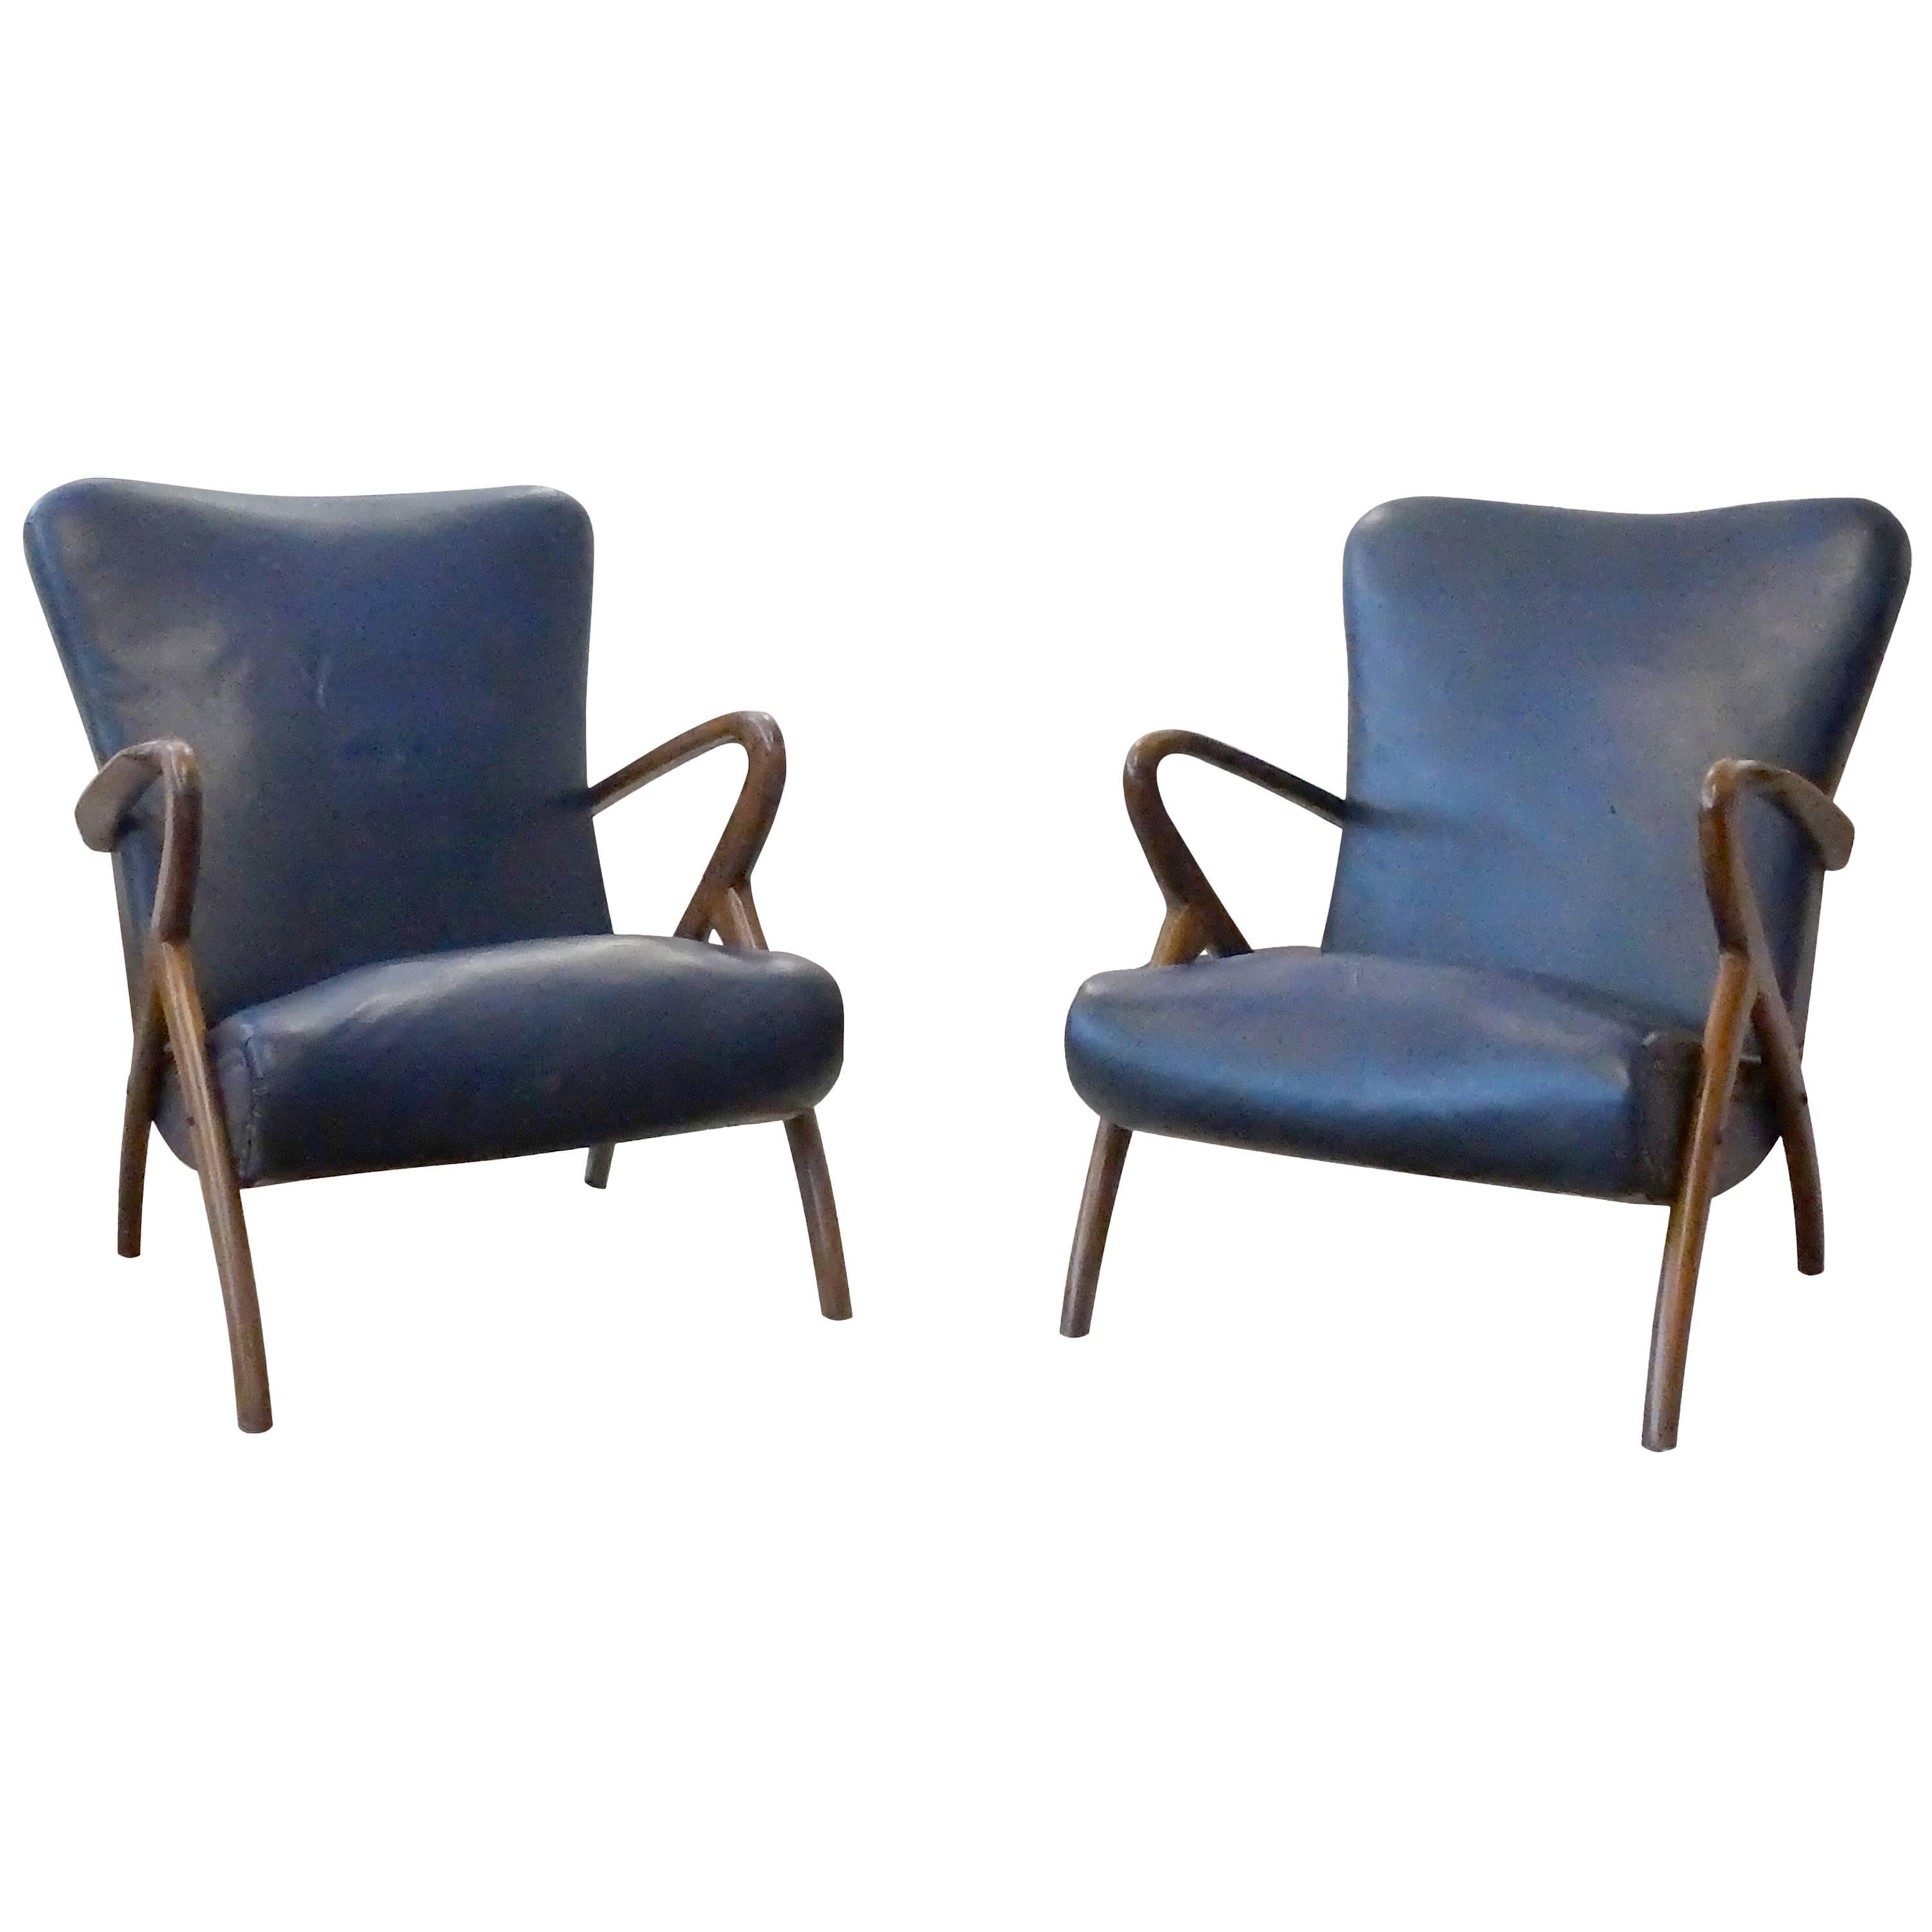 Guglielmo Ulrich , Pair of Italian Armchairs in Blue Leather and Wood, 1950s